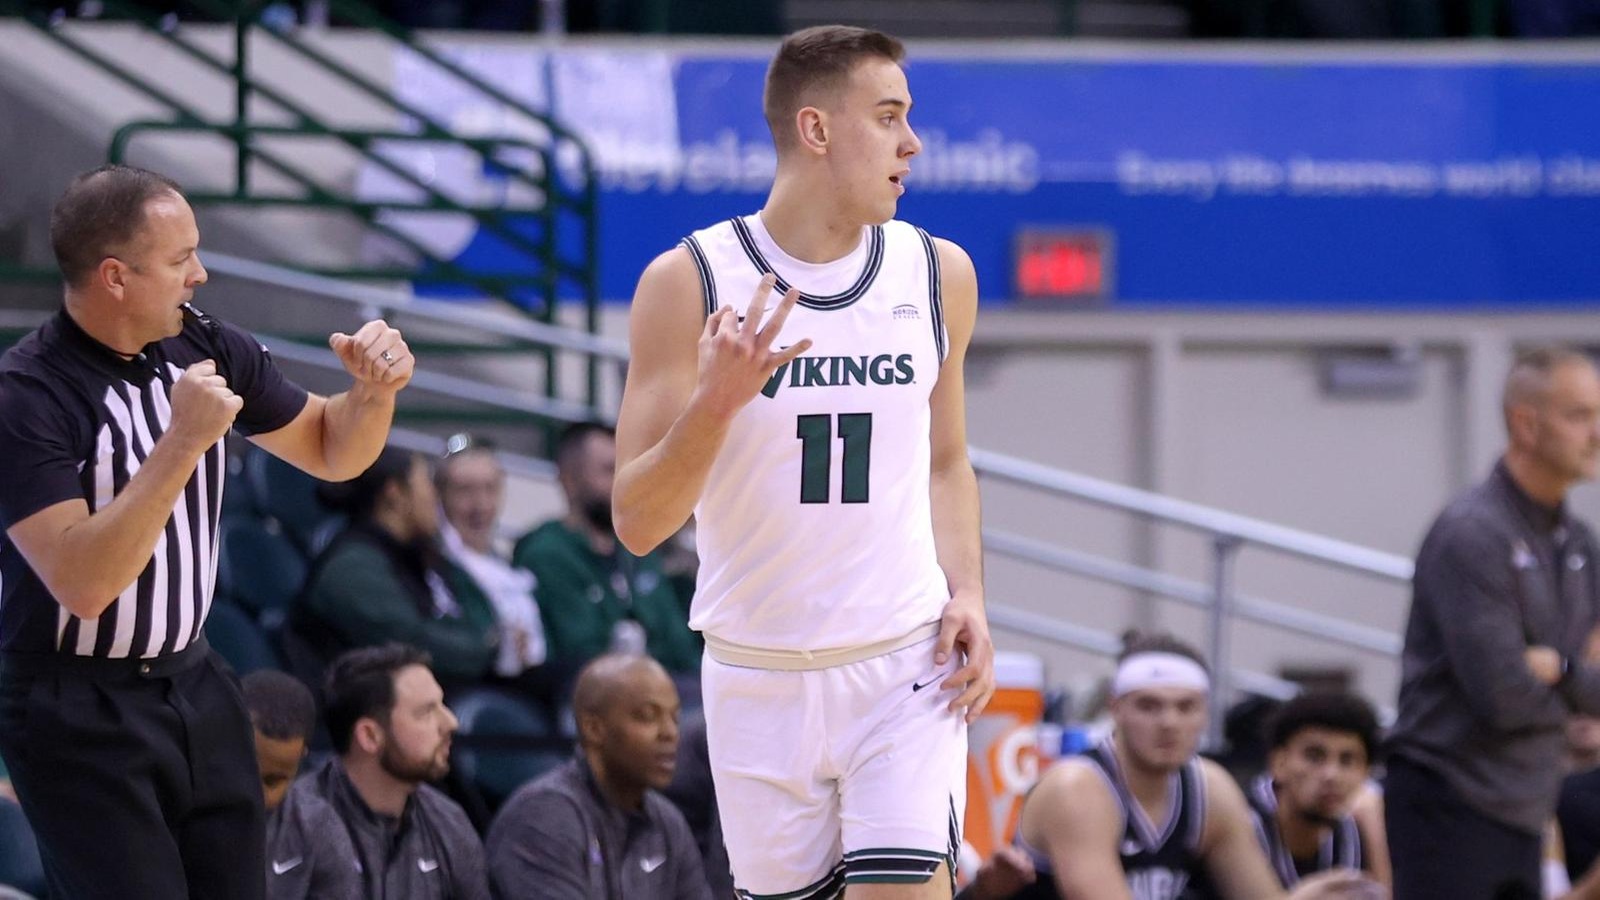 Cleveland State Men’s Basketball Stays Undefeated In #HLMBB Play With 85-75 Victory Over Wright State